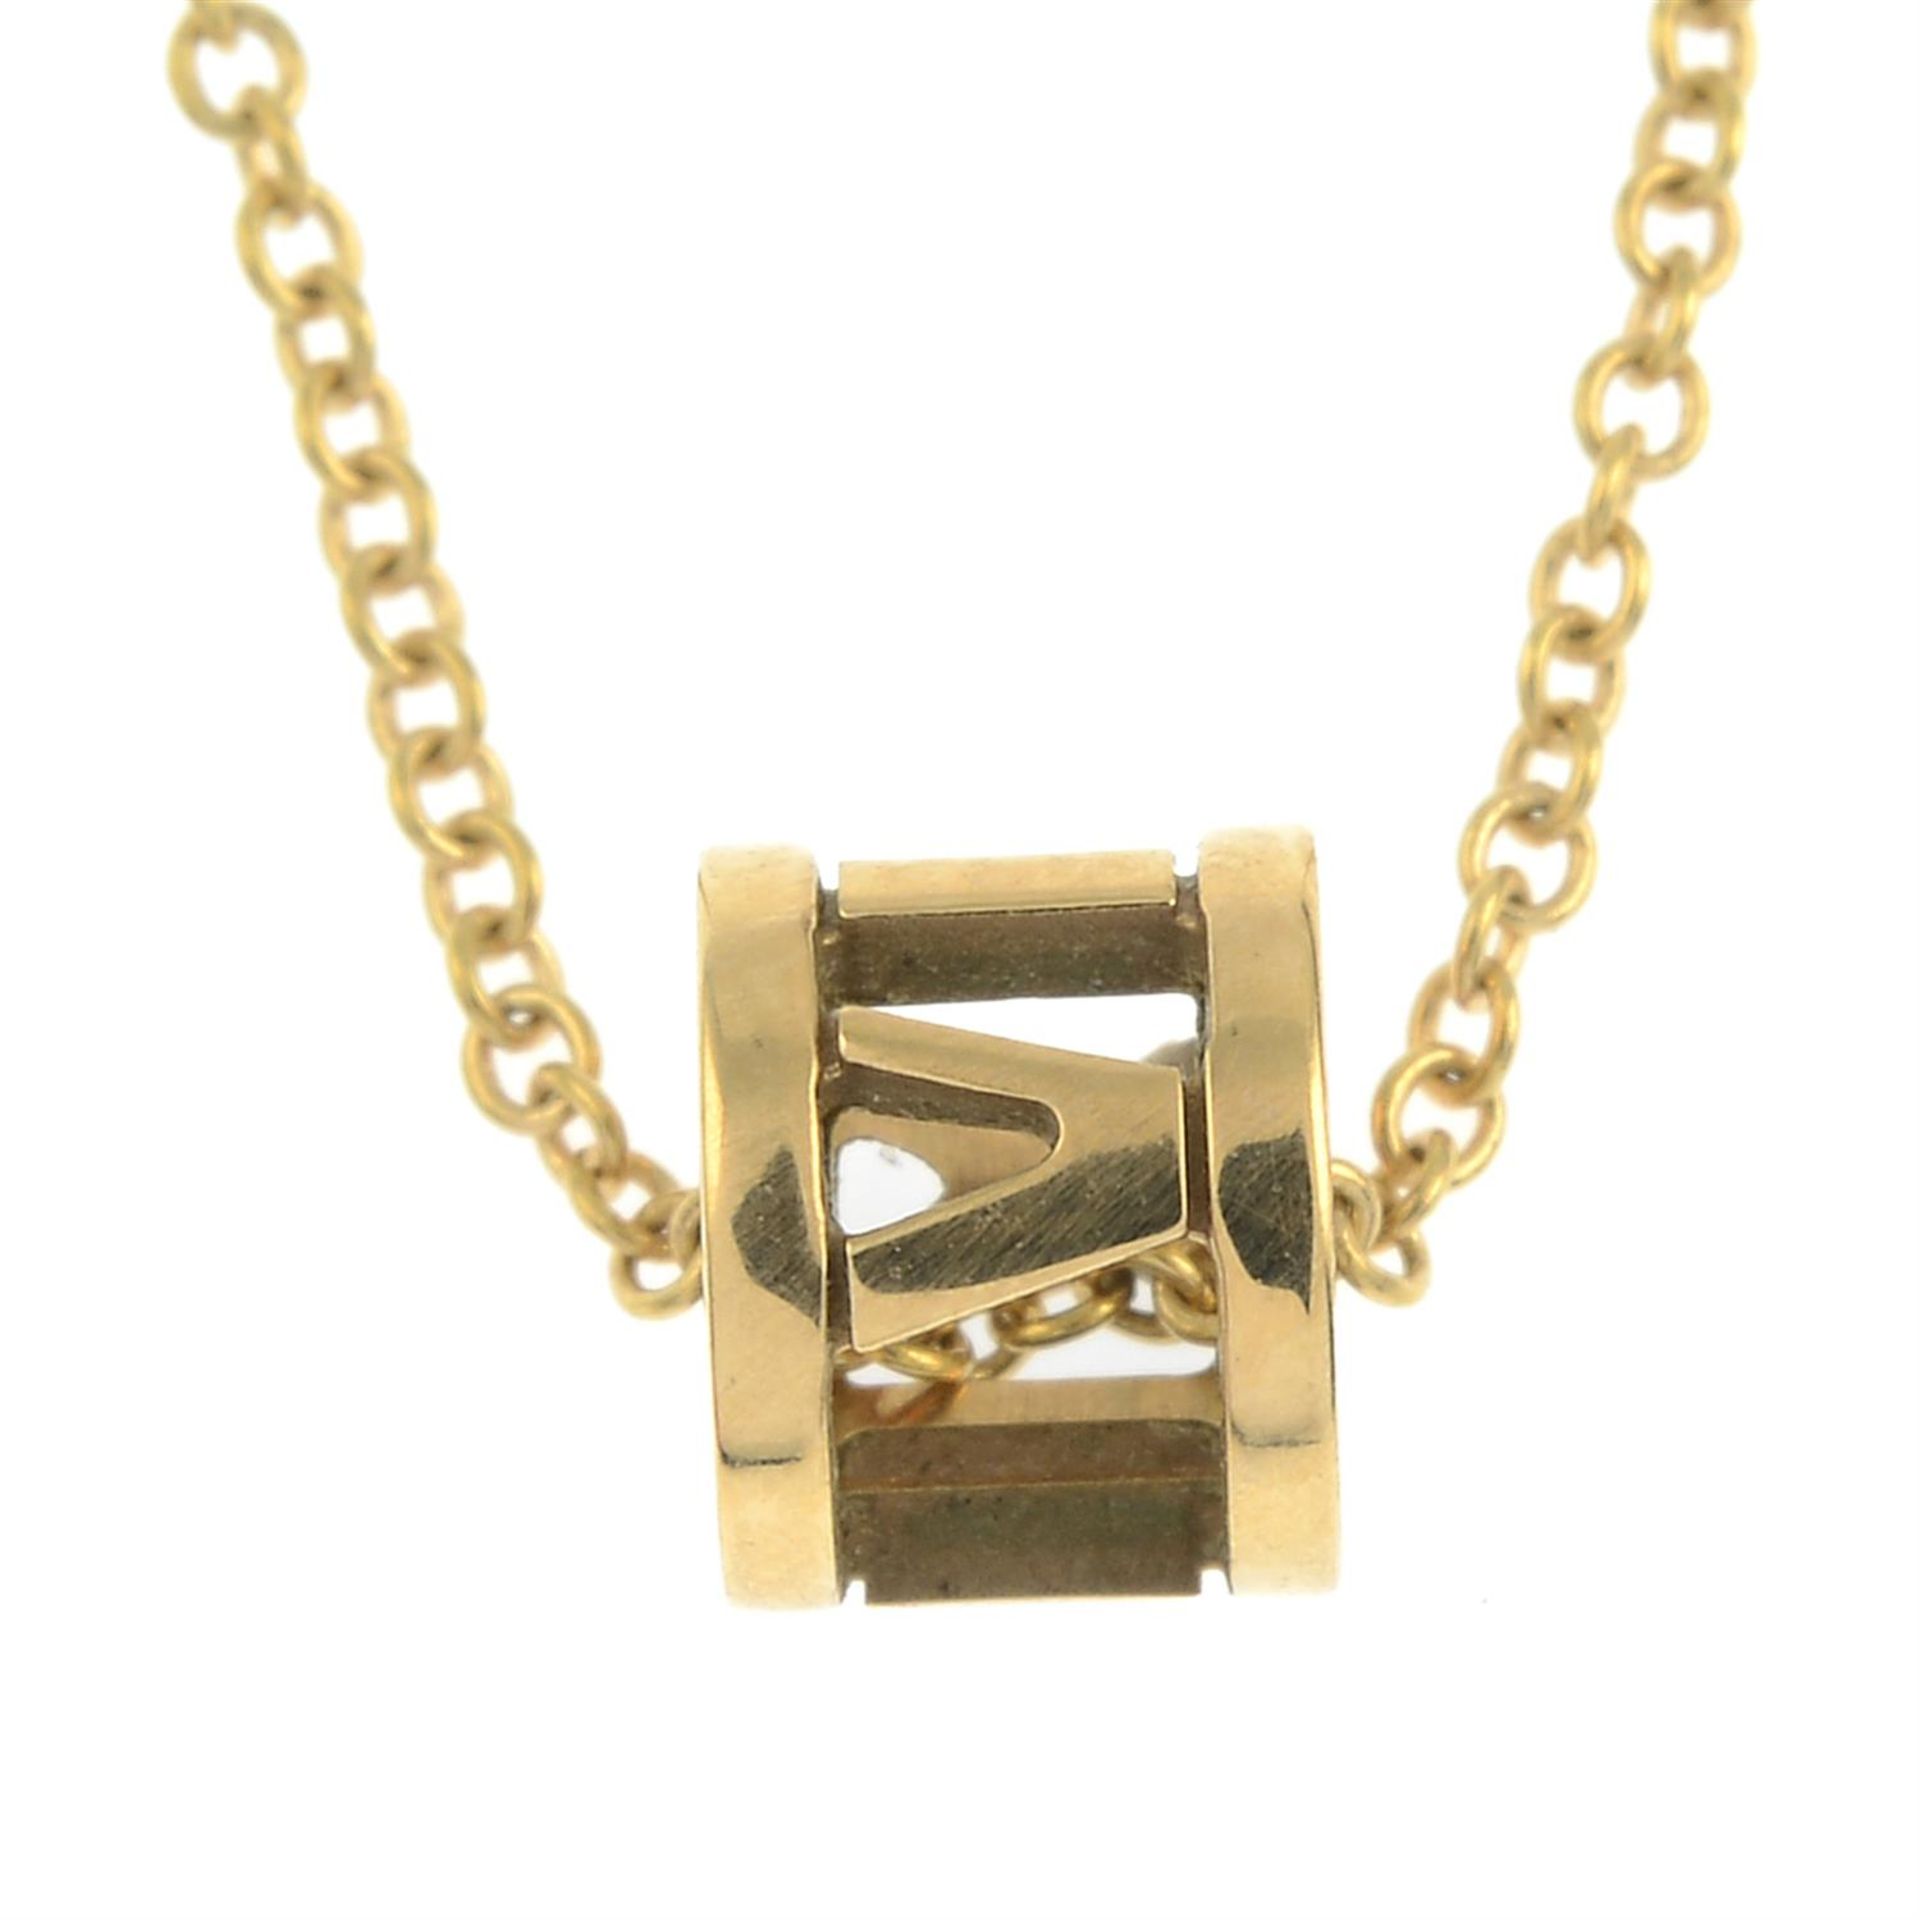 An 'Atlas X Open' pendant, with trace-link chain, by Tiffany & Co.